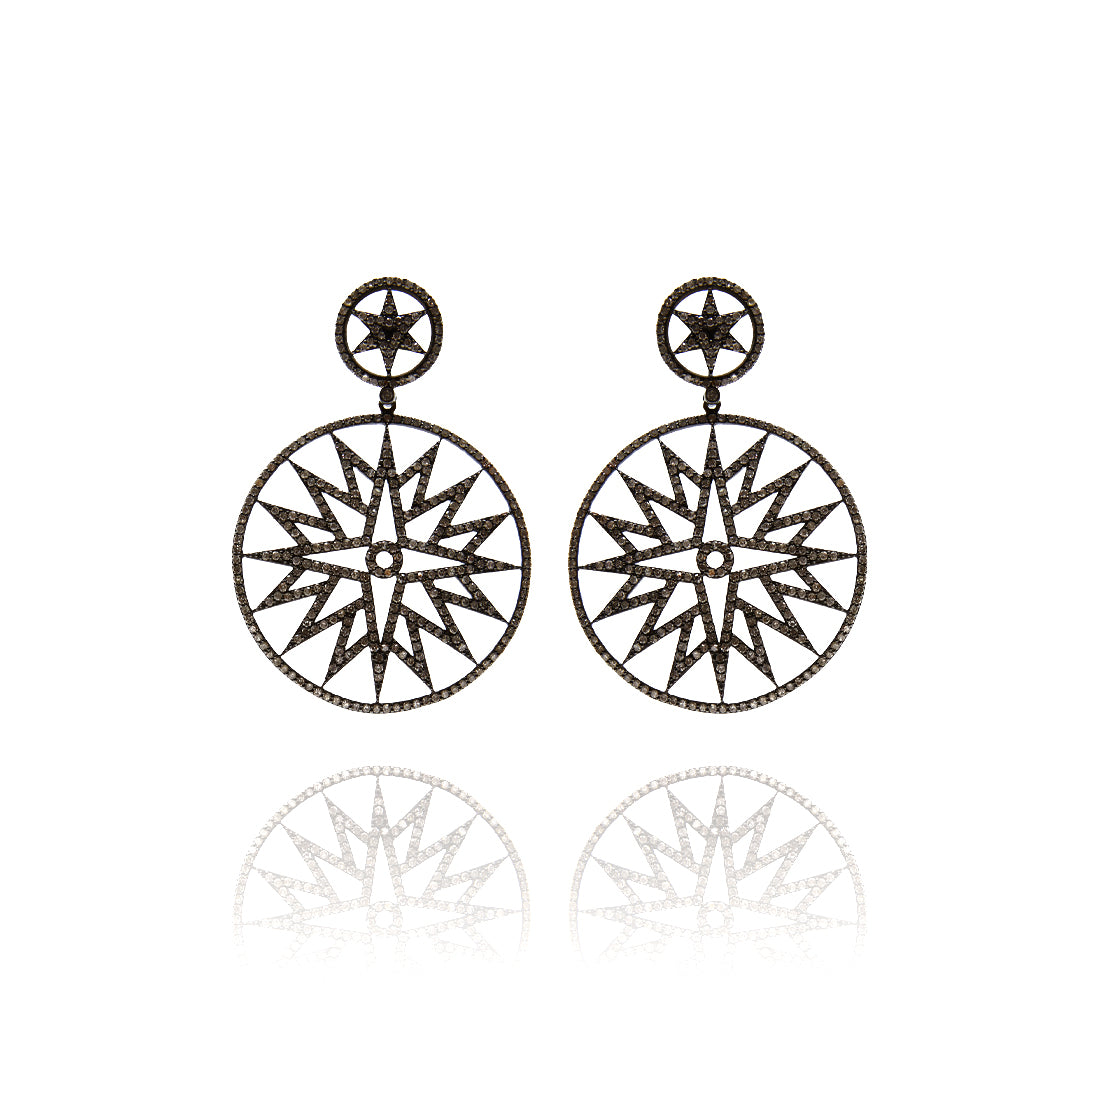 Rose gold earrings with diamonds and silver